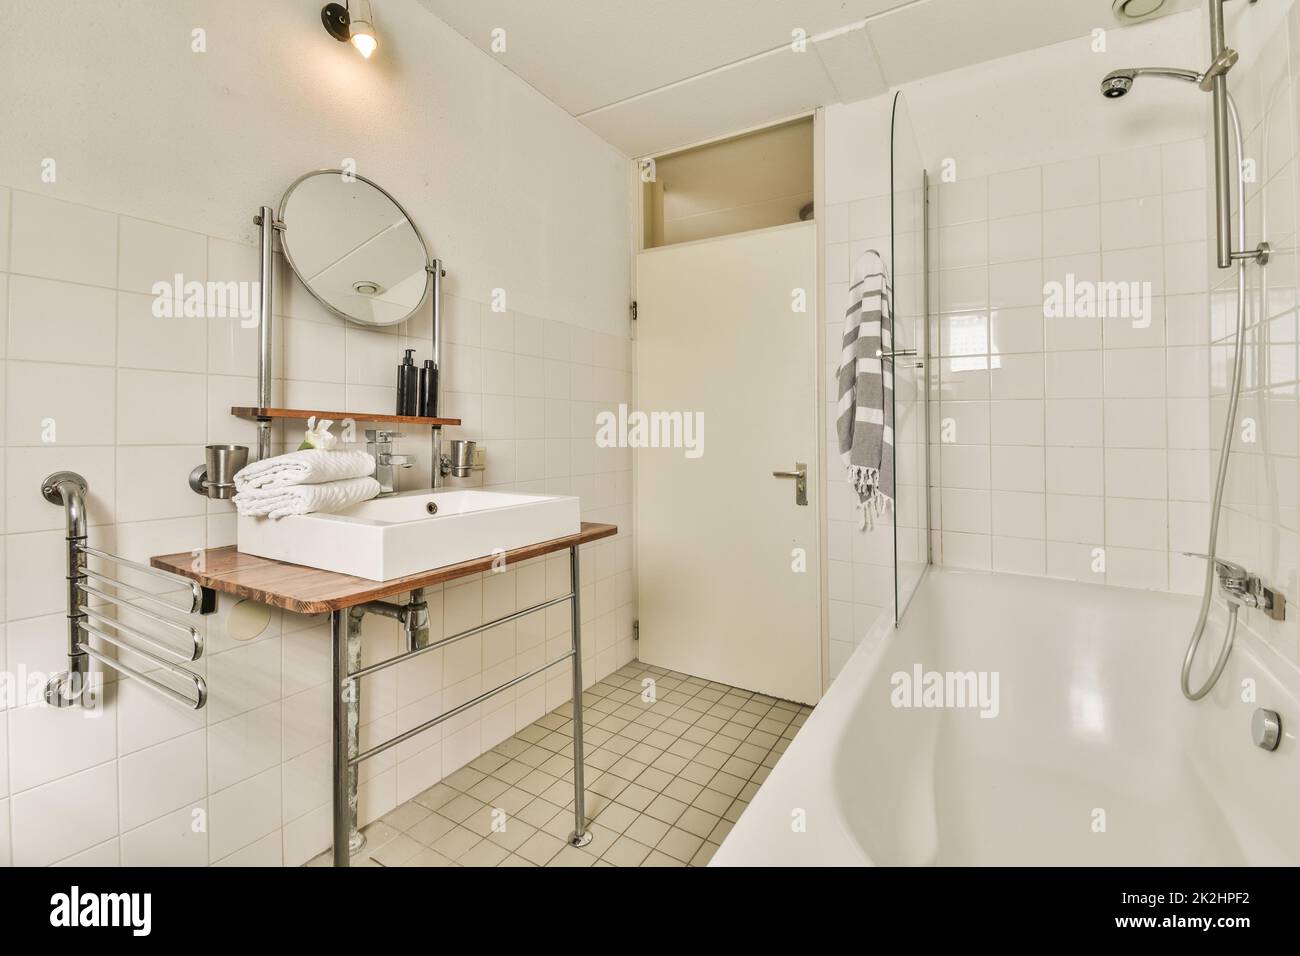 Glass partition between shower tap and wall flush toilet in barhroom at home Banque D'Images